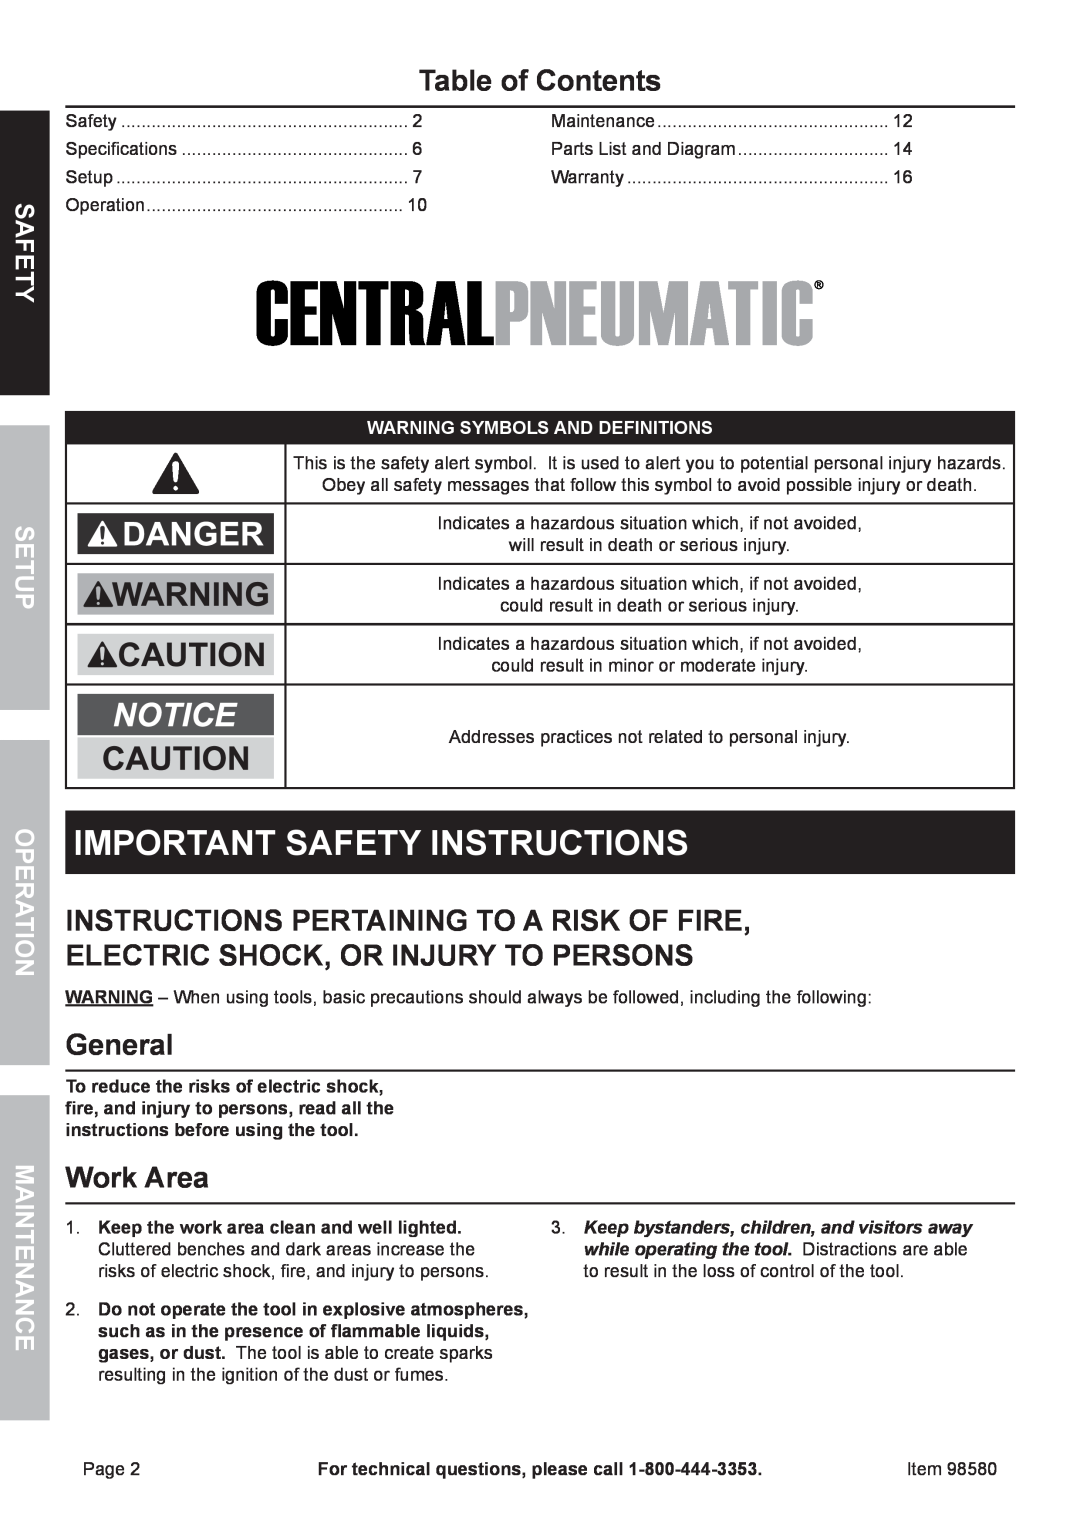 United States Pumice Company 98580 manual Table of Contents, Instructions Pertaining to a Risk of Fire, General, Work Area 